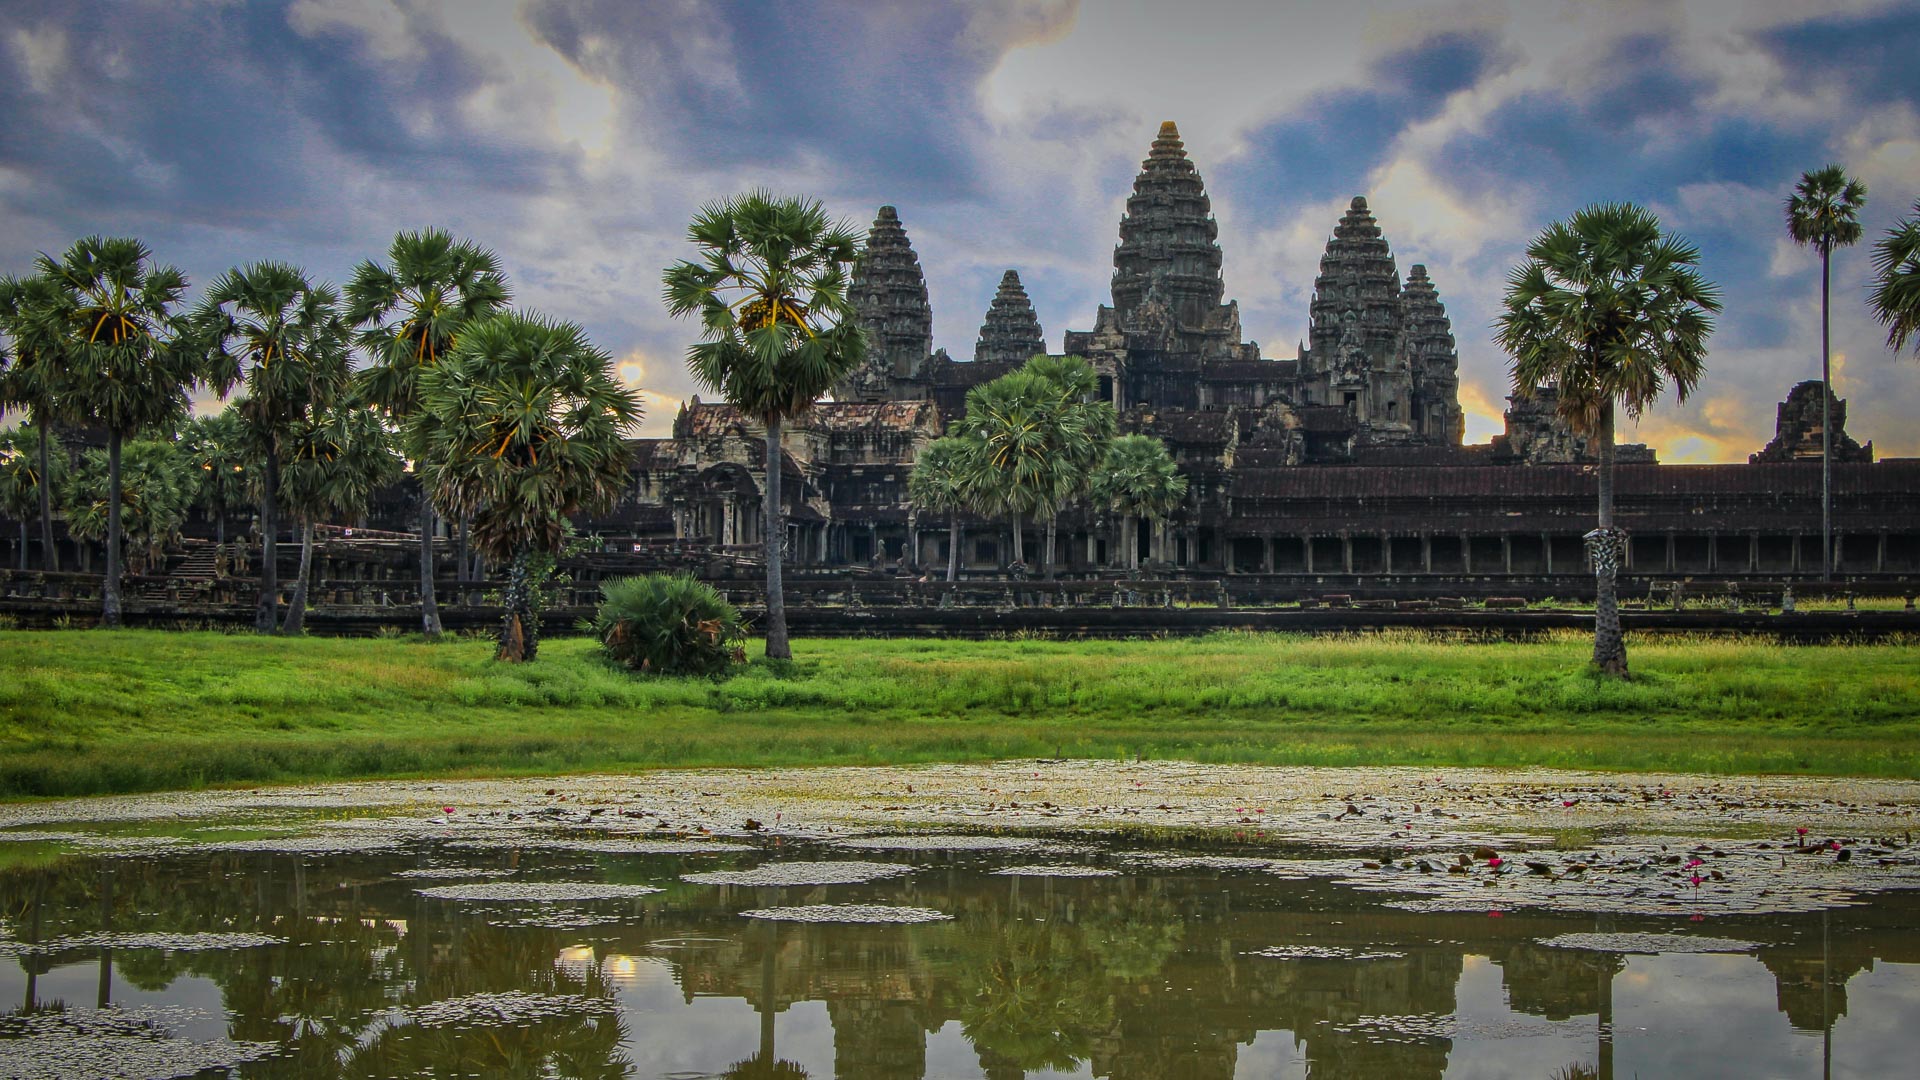 The panoramic view of the Angkor Wat.